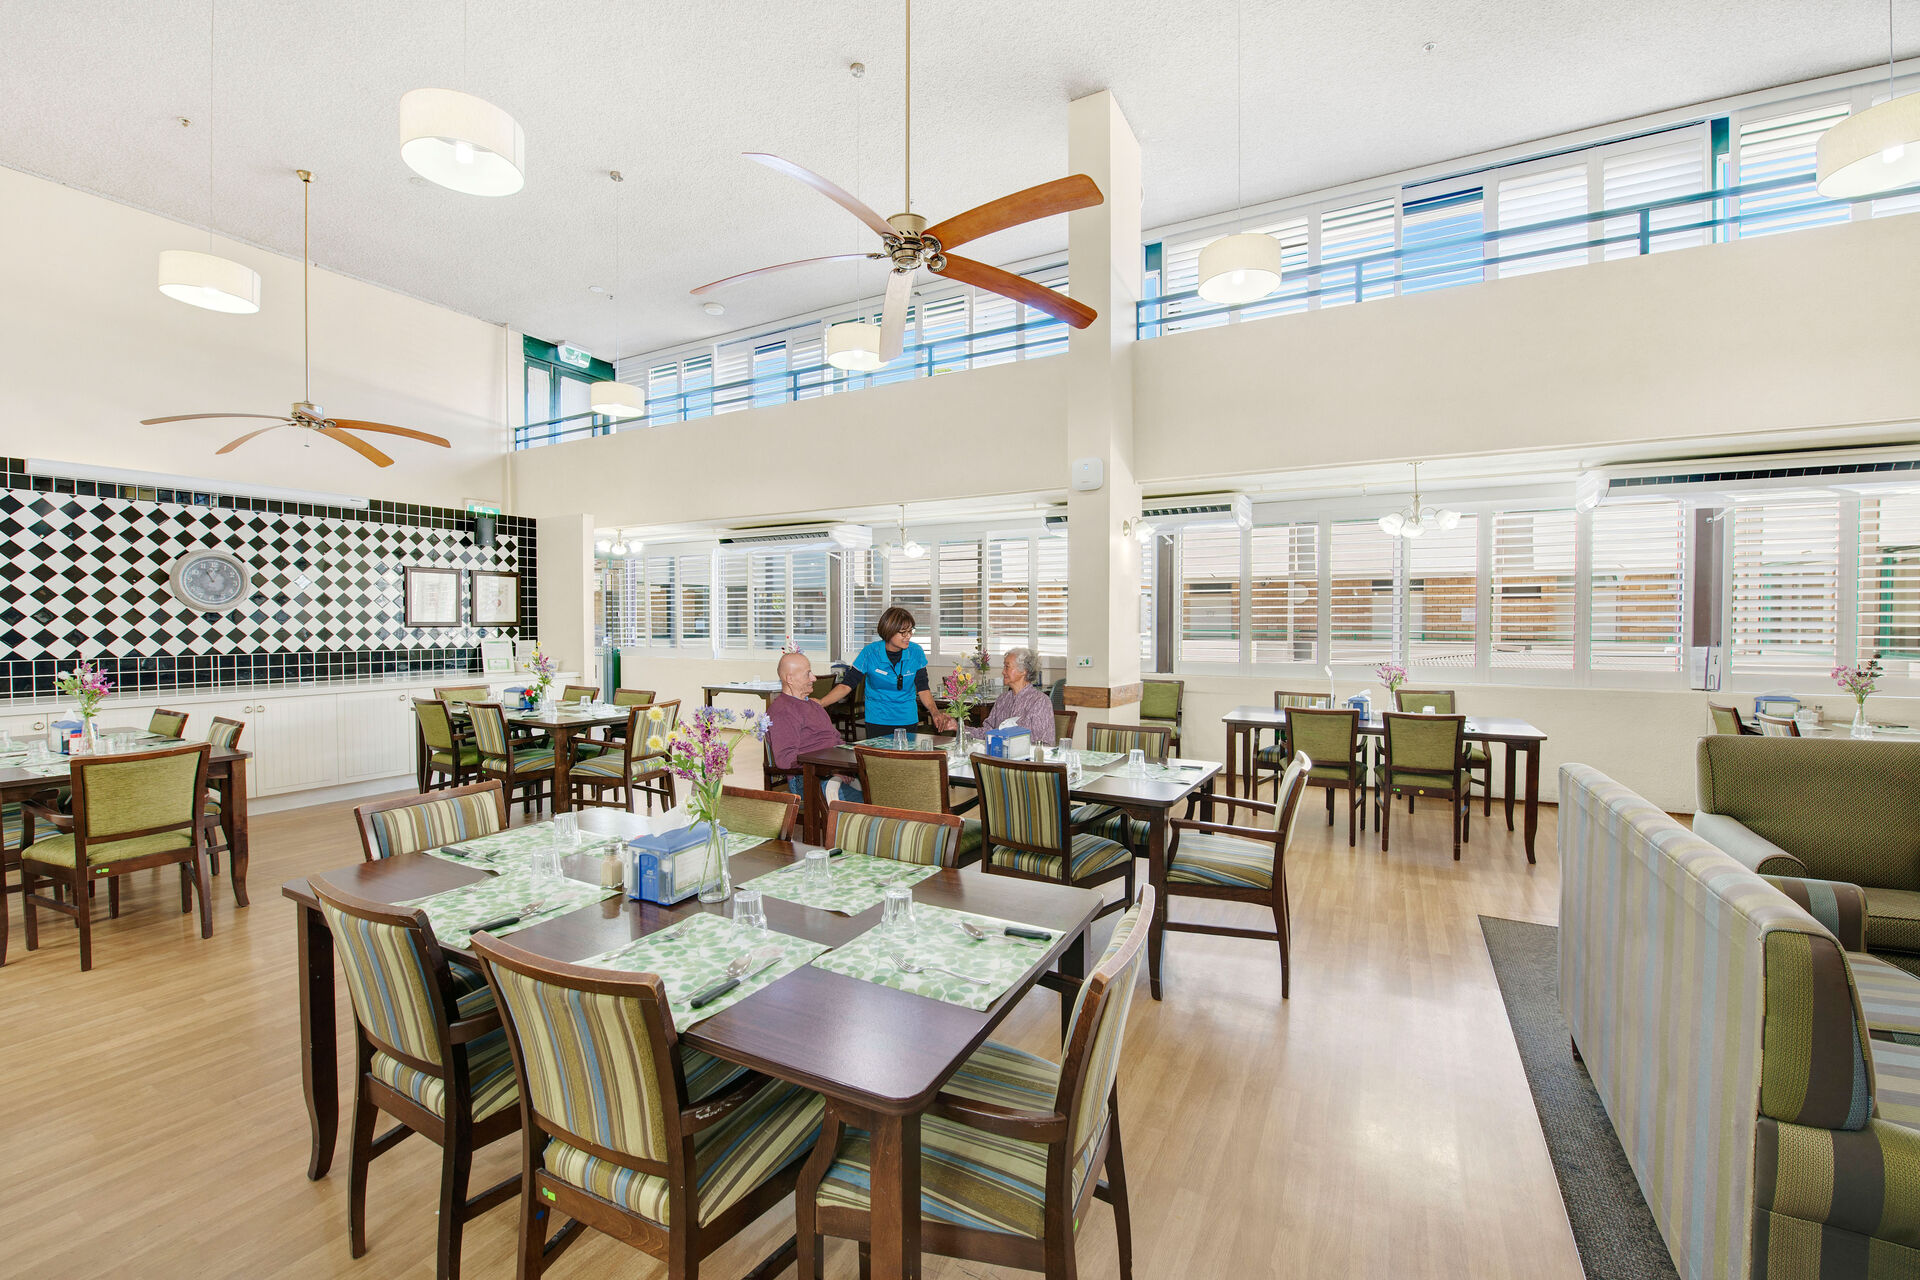 large dining room serving fresh meals at baptistcare cooinda court residential aged care home in macquarie park northern sydney